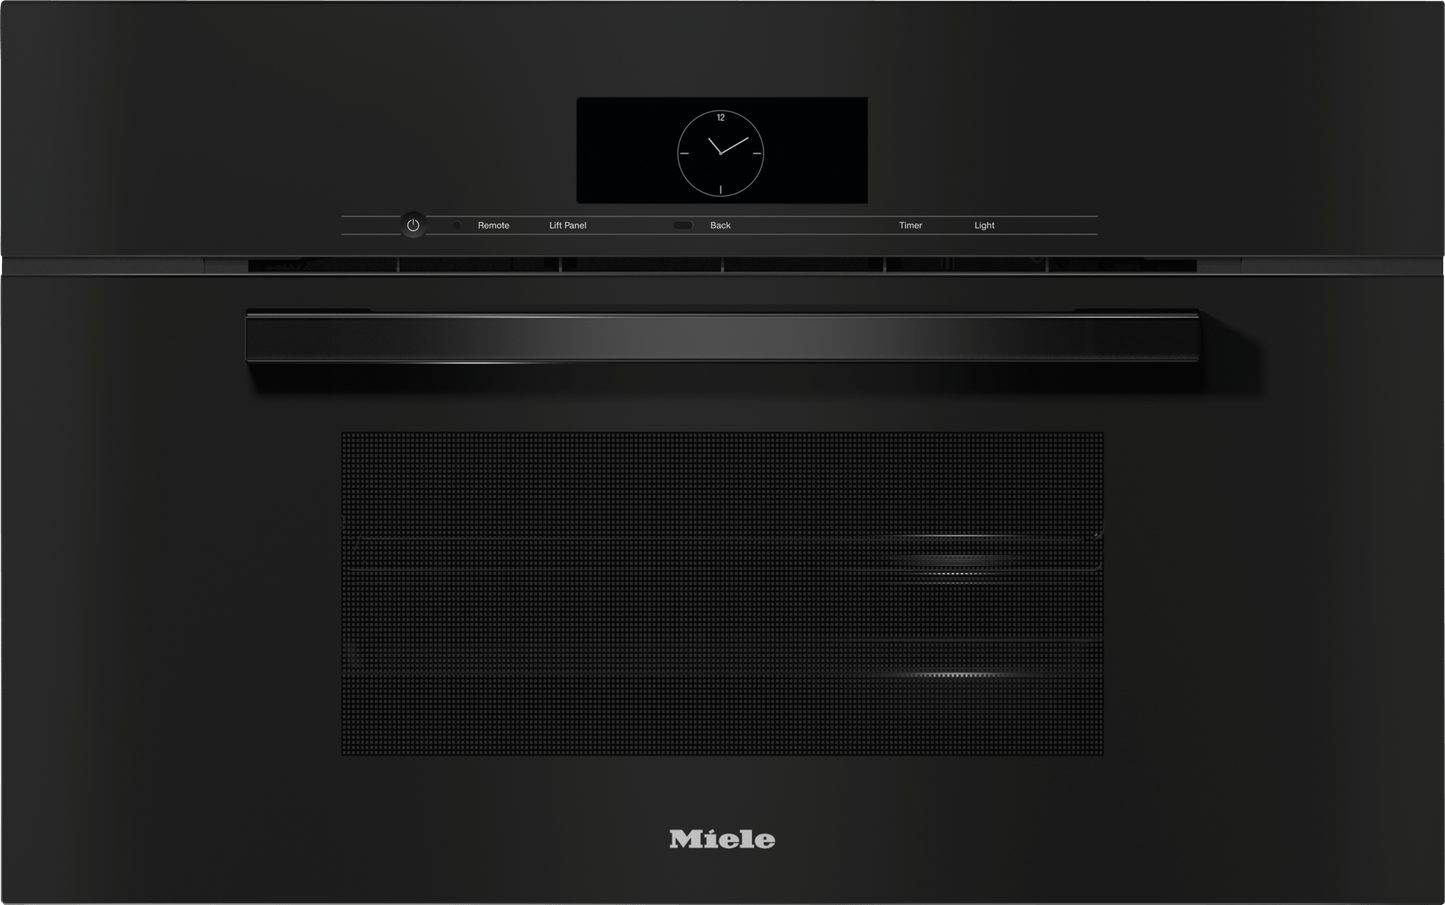 Miele DGC7870 BLACK   30" Compact Combi-Steam Oven Xl For Steam Cooking, Baking, Roasting With Roast Probe + Menu Cooking.